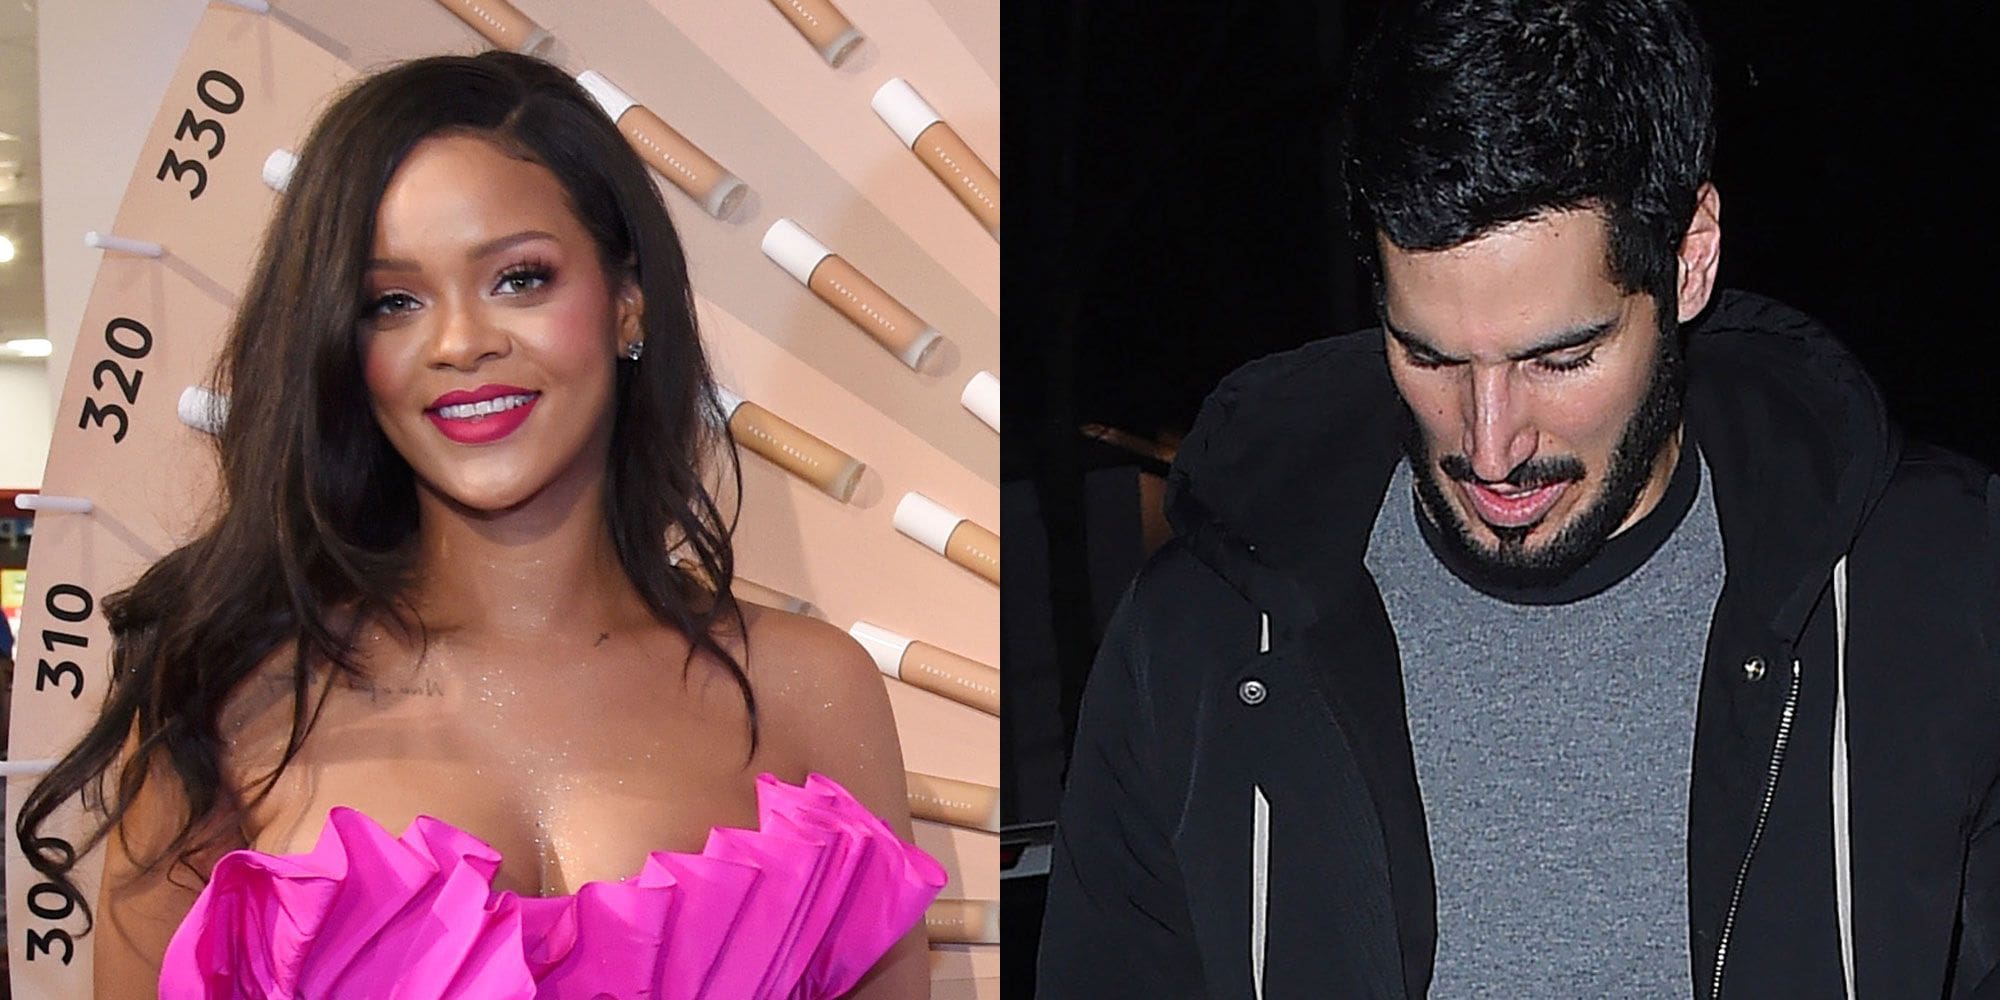 Rihanna And Her BF Hassan Jameel Were Spotted At A Lakers-Rockets Game - Here's The Photo; Fans Want Marriage And Kids